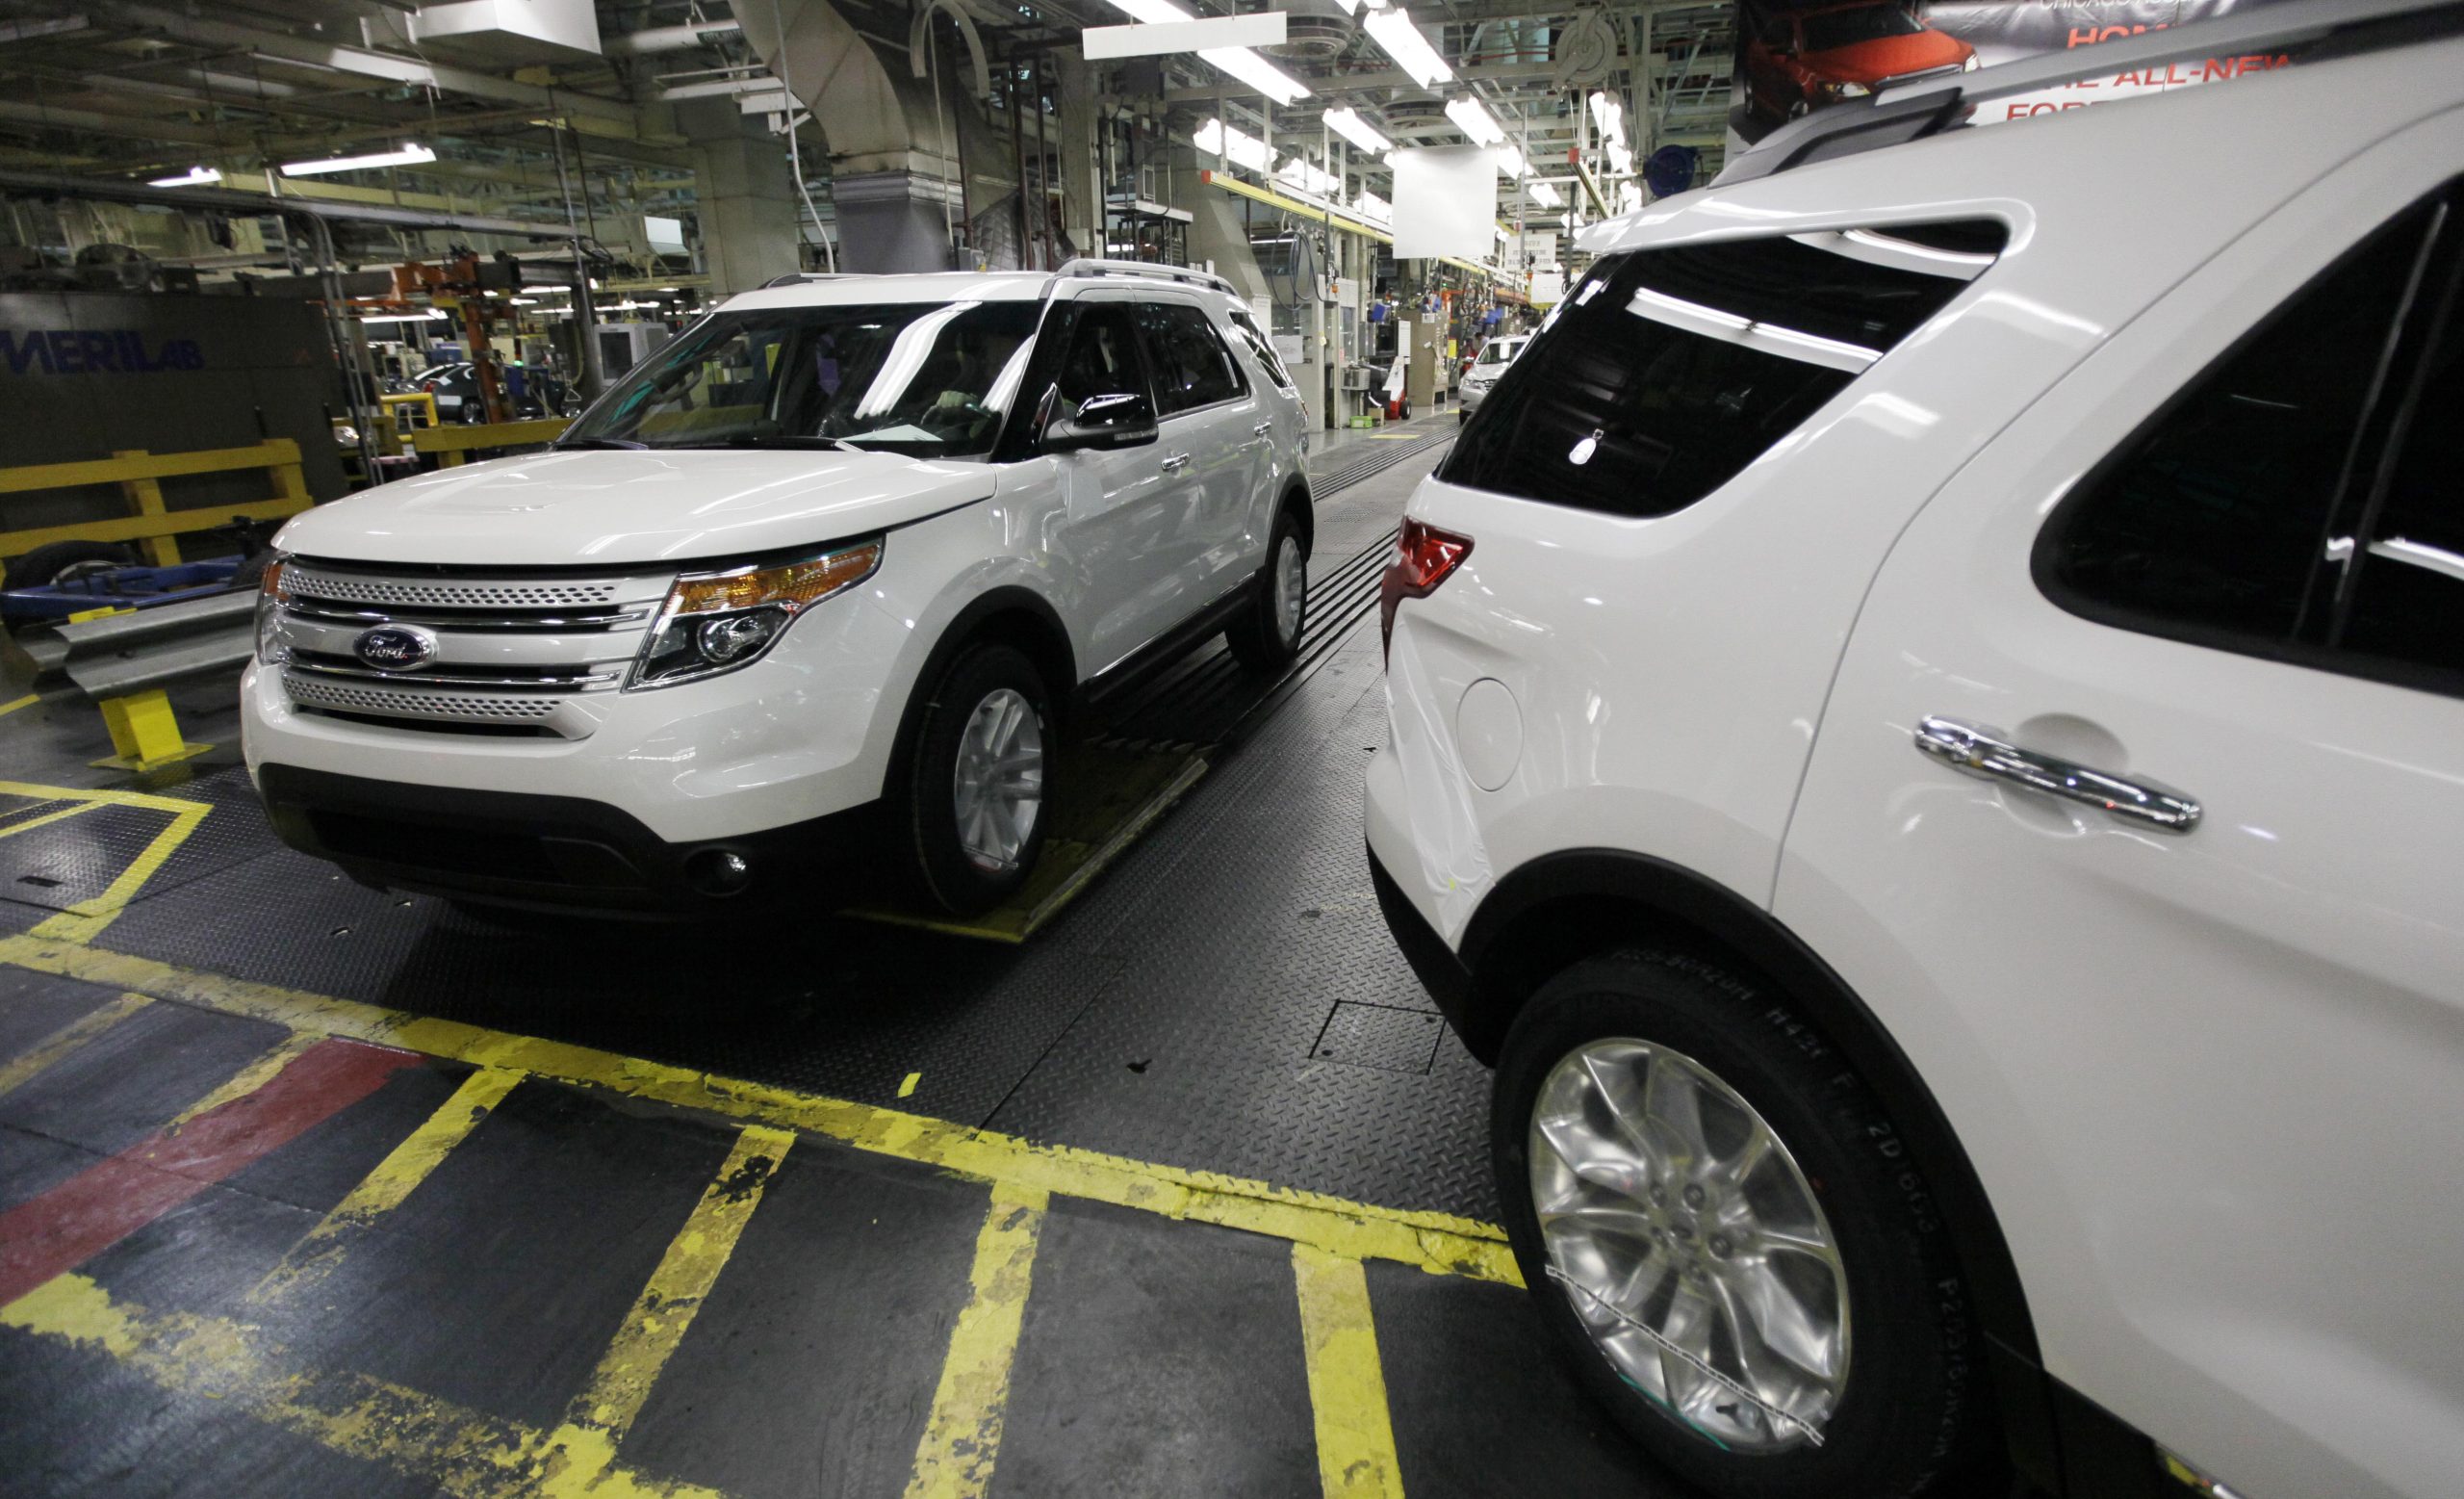 Ford Explorer Owners Speak Out - Literally - About The SUV Making Them Sick